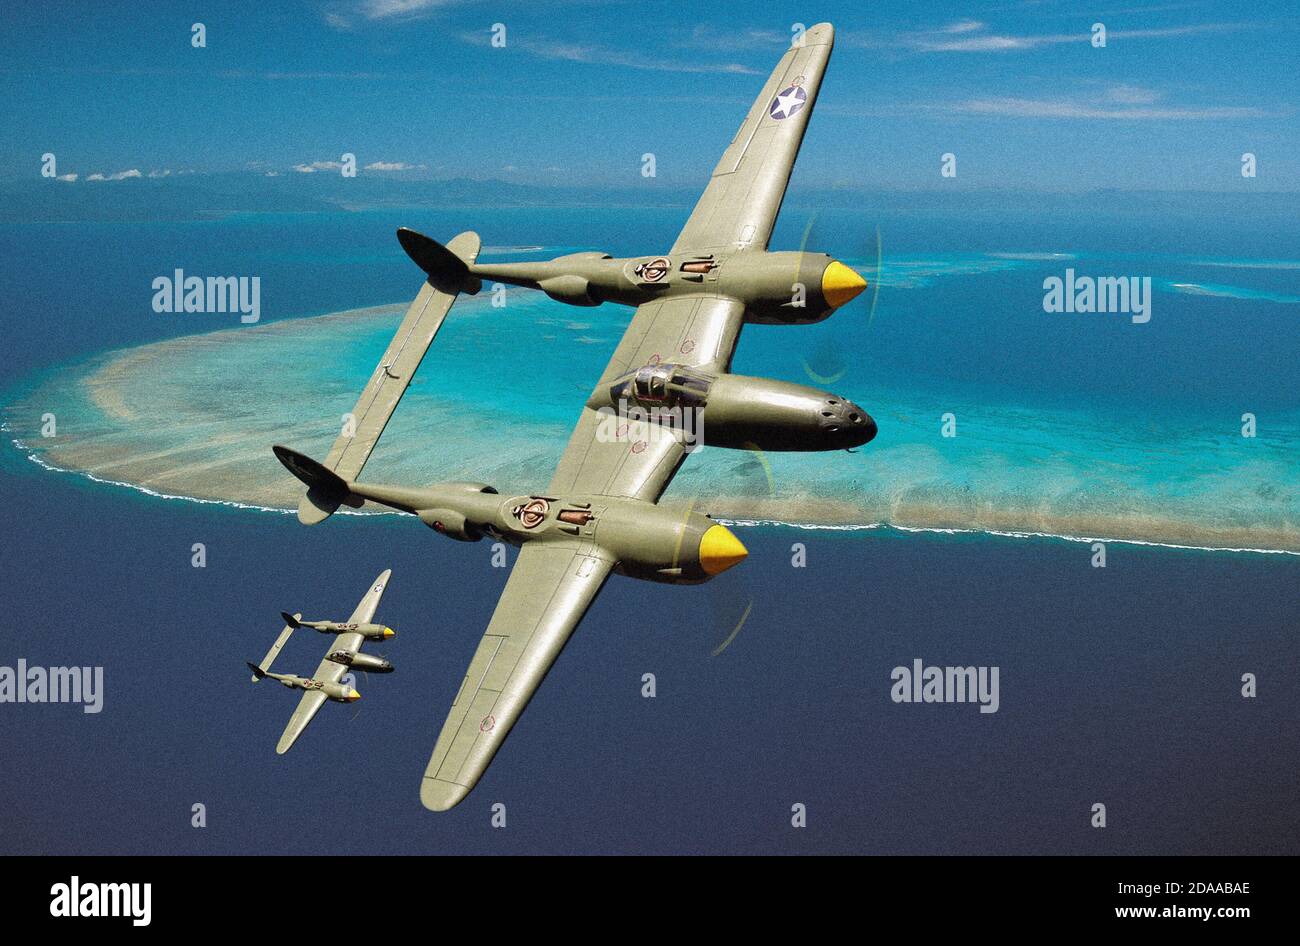 World War Two Lockheed P38 Lightning fighter aircraft over a  Pacific atoll scenario, using plastic models and Photoshop. Stock Photo